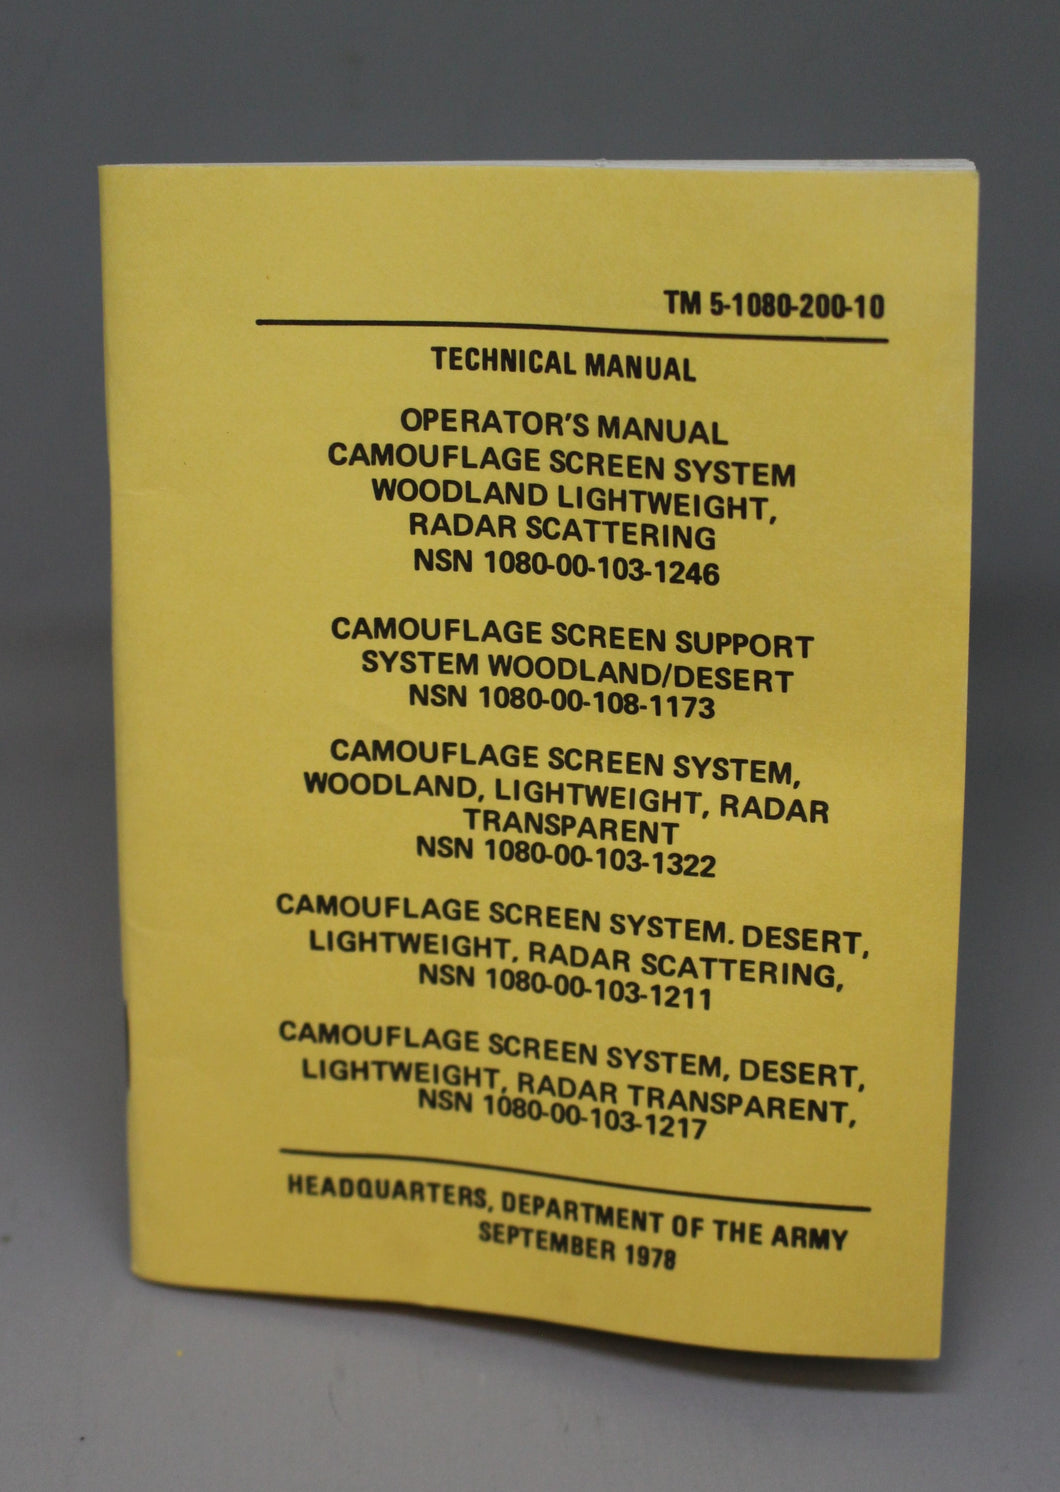 Radar Scattering Camouflage Screening System Technical Manual - TM 5-1080-200-10